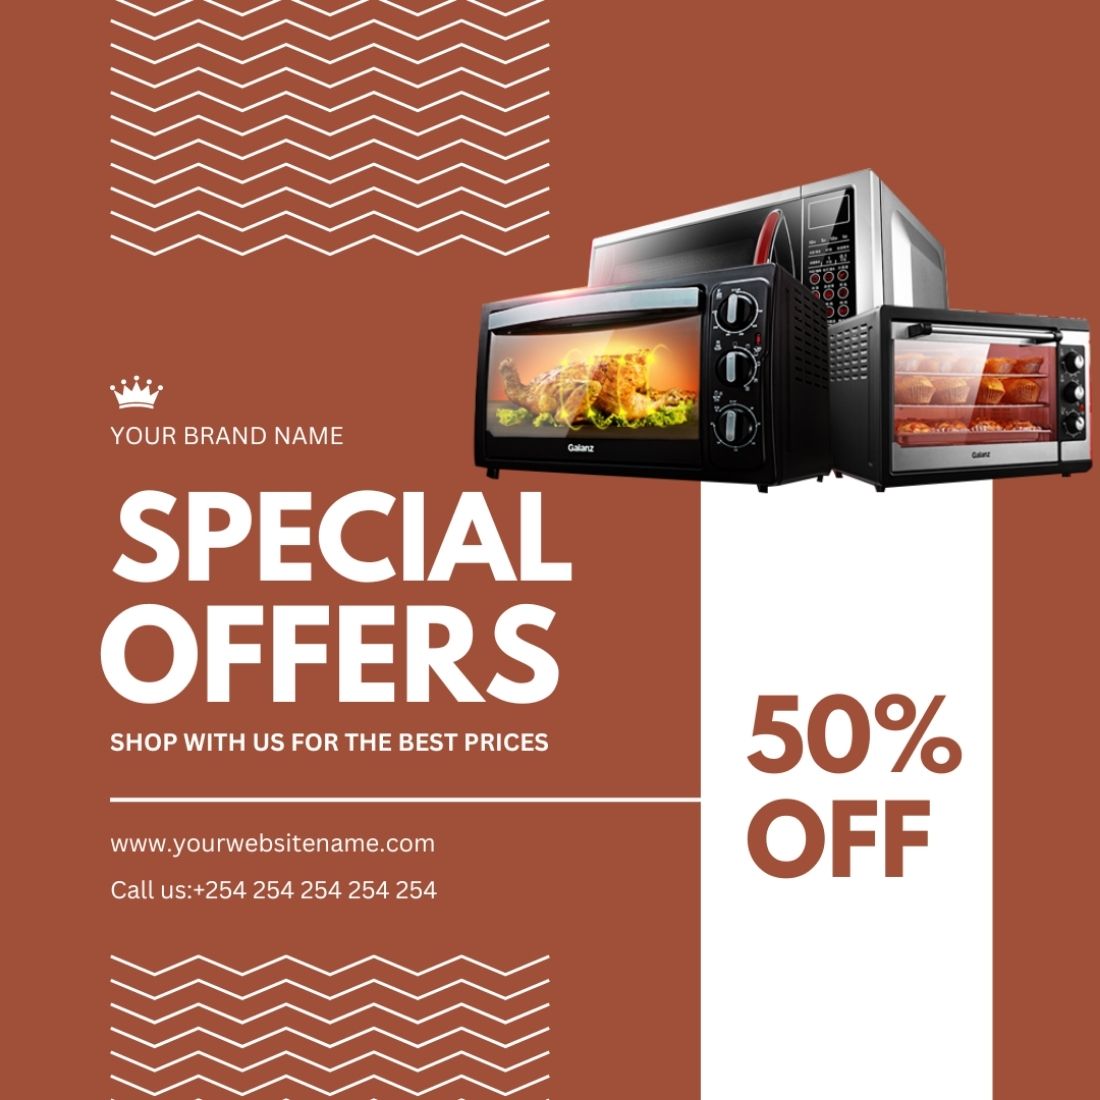 1 Instagram sized Canva Microwave Special Offer Sale Design Template Bundle – $4 cover image.